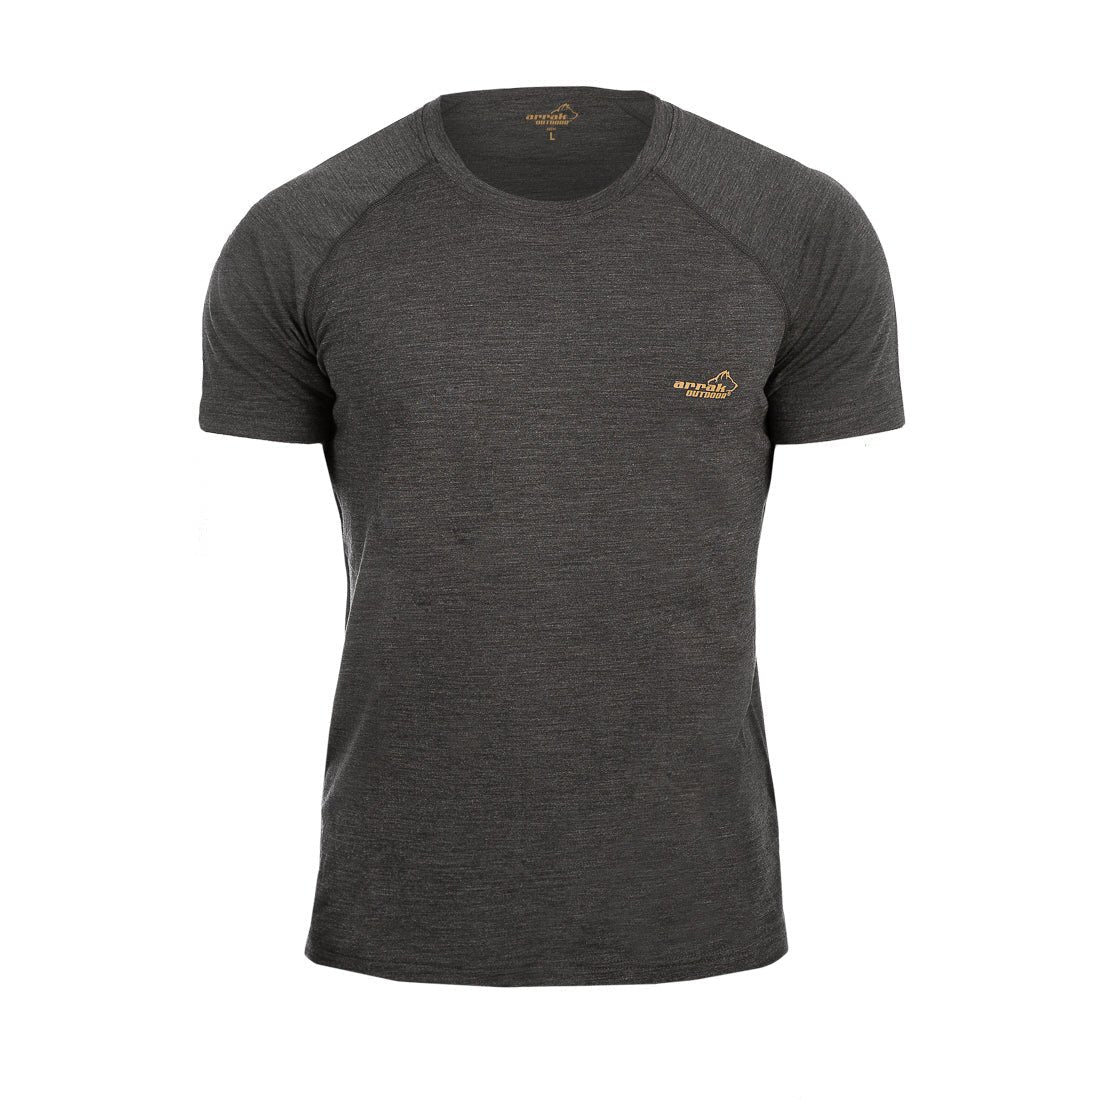 Stay Cool and Dry with the Short Sleeve Moisture-Wicking Merino Wool &  Bamboo Top for Men- Arrak Outdoor USA